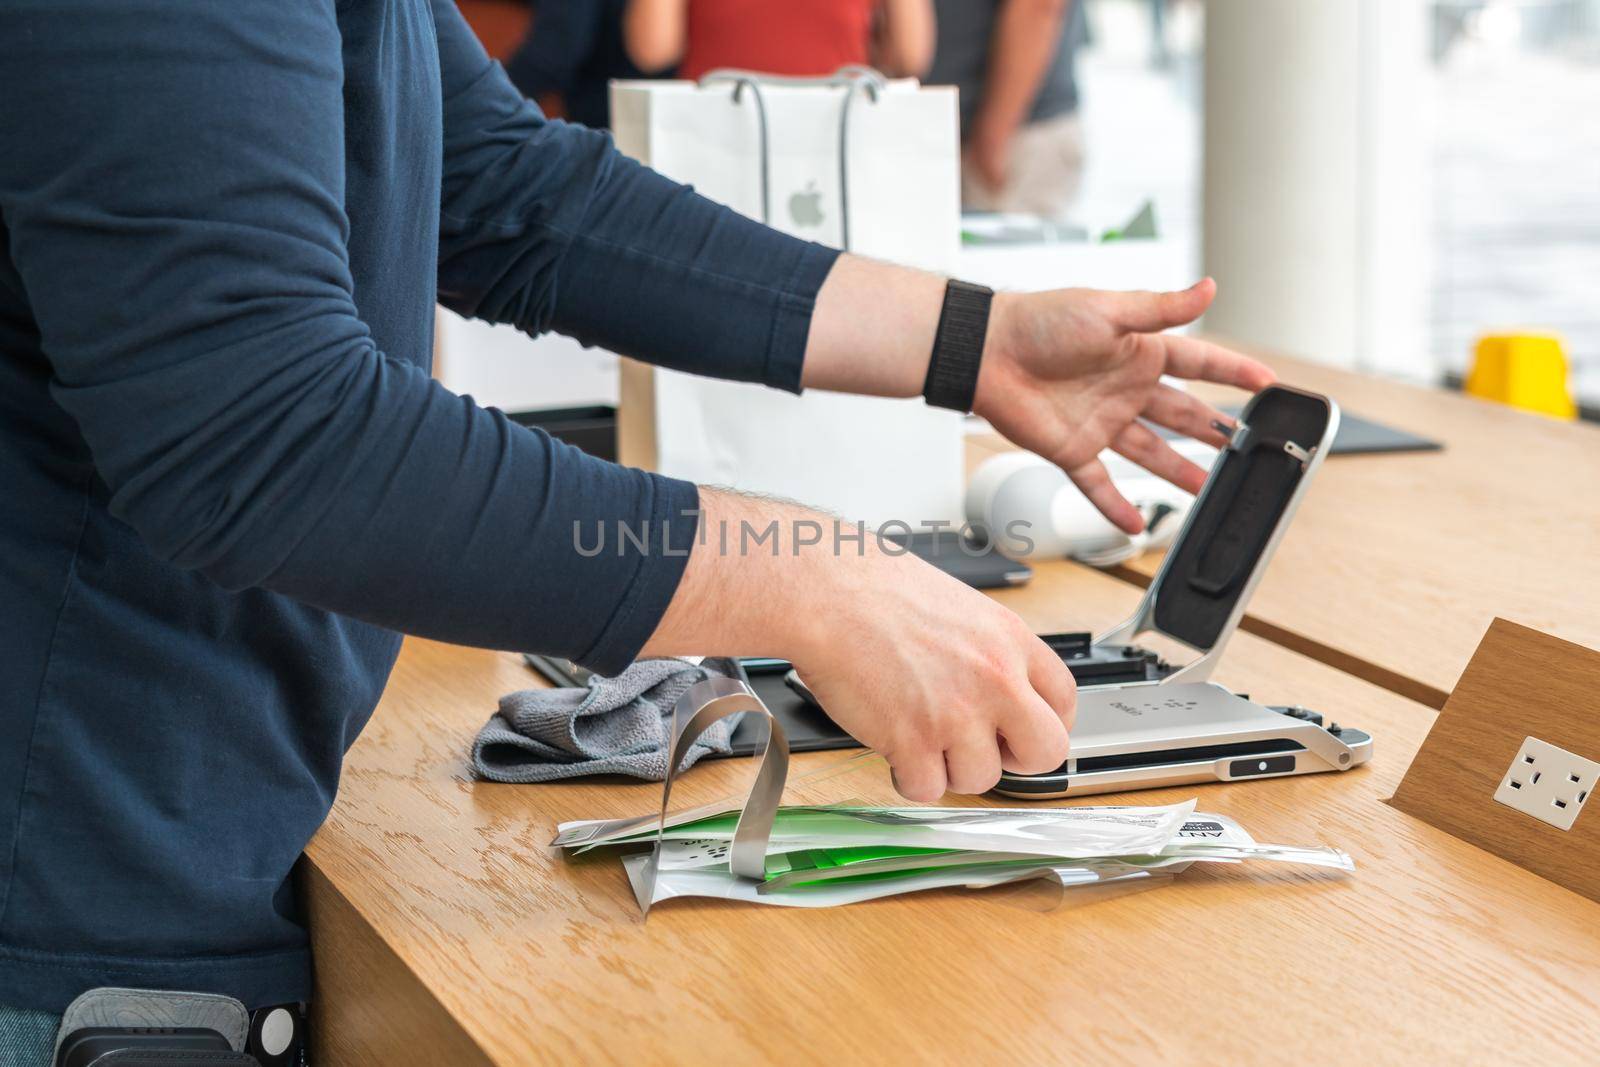 Aventura, Florida, USA - September 20, 2019: Closeup view of applying screen protector on an iPhone 11 pro in Apple store in Aventura mall